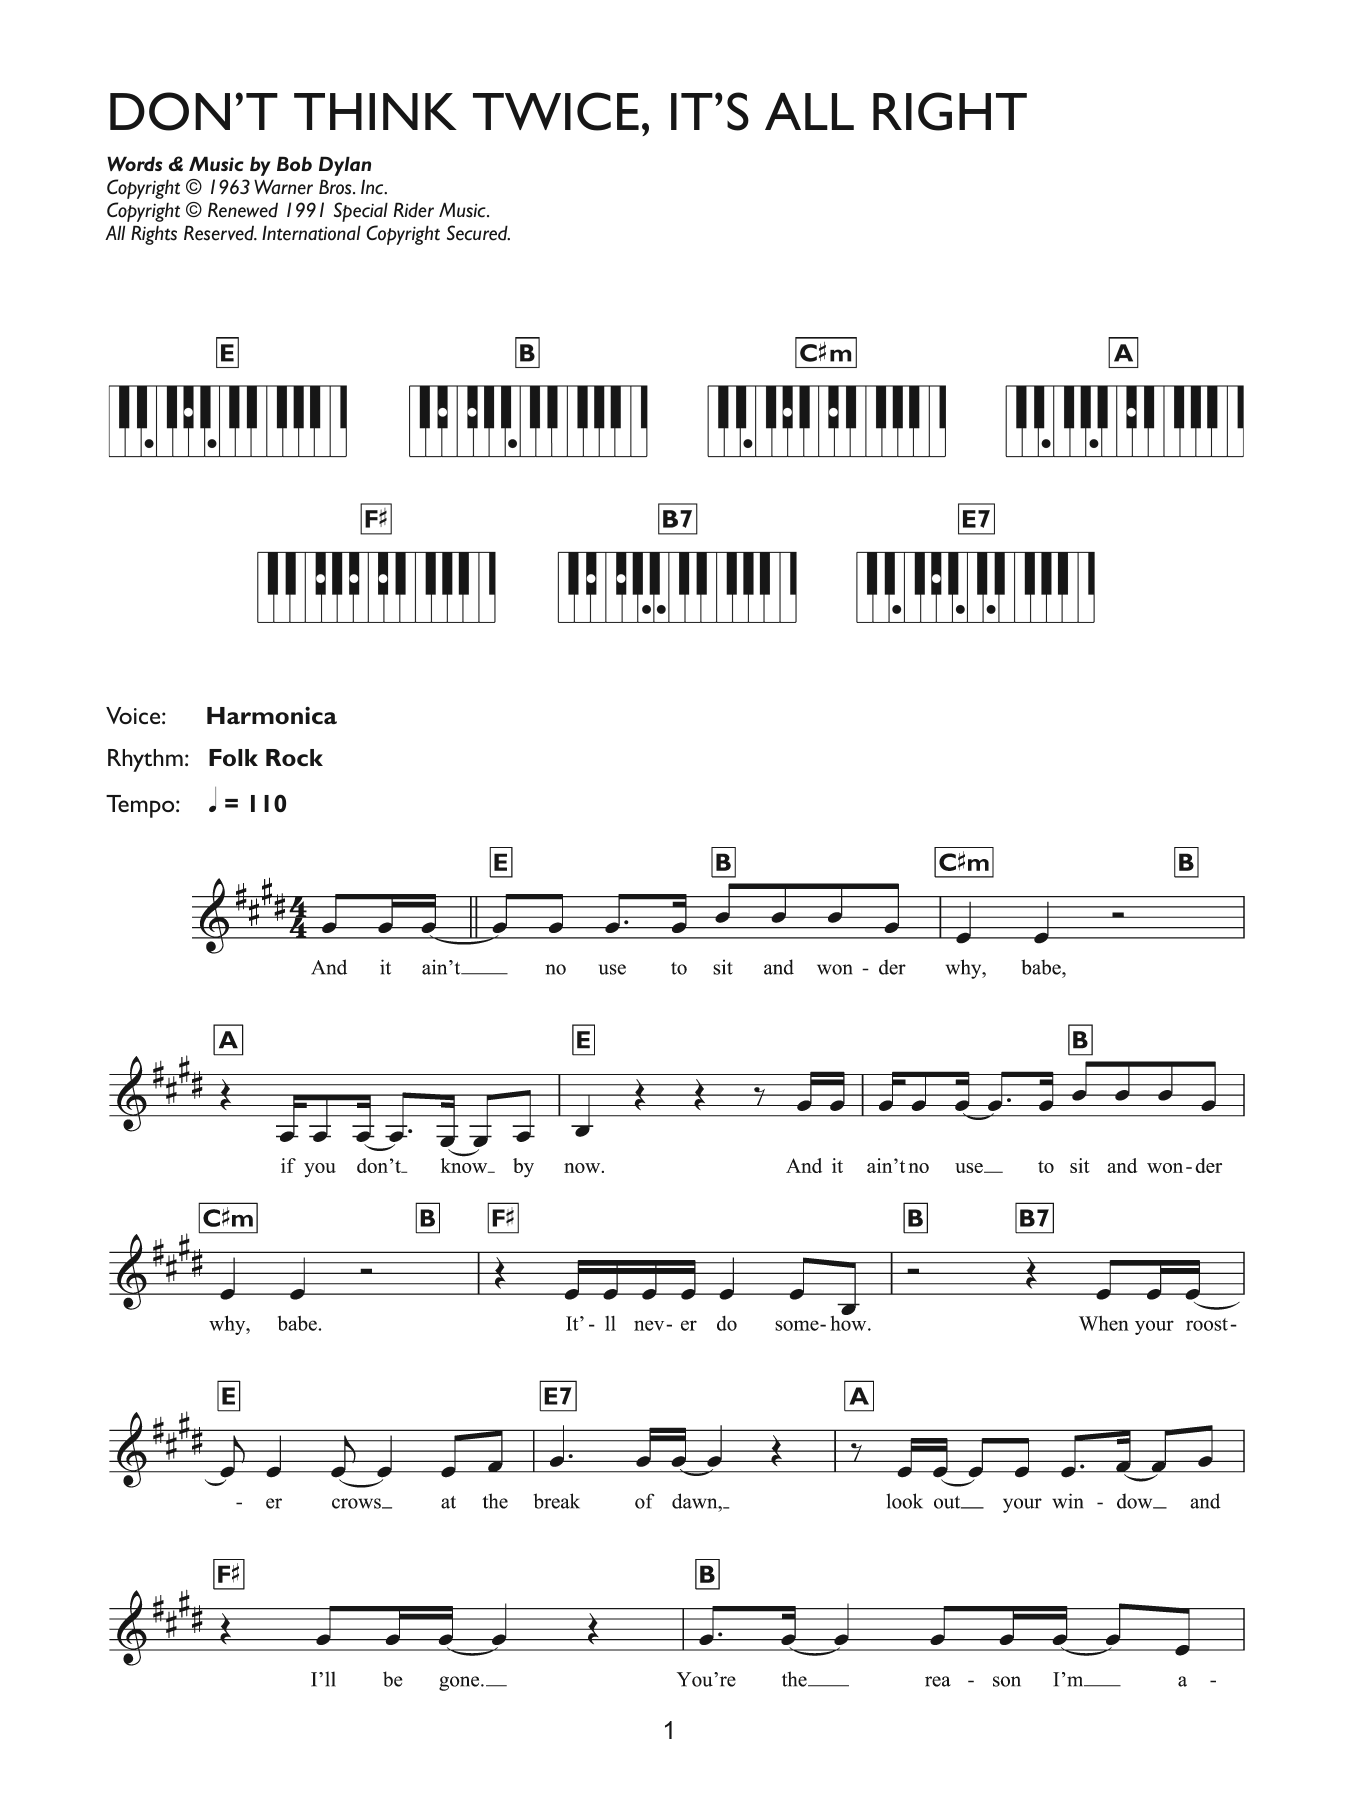 Download Bob Dylan Don't Think Twice, It's All Right Sheet Music